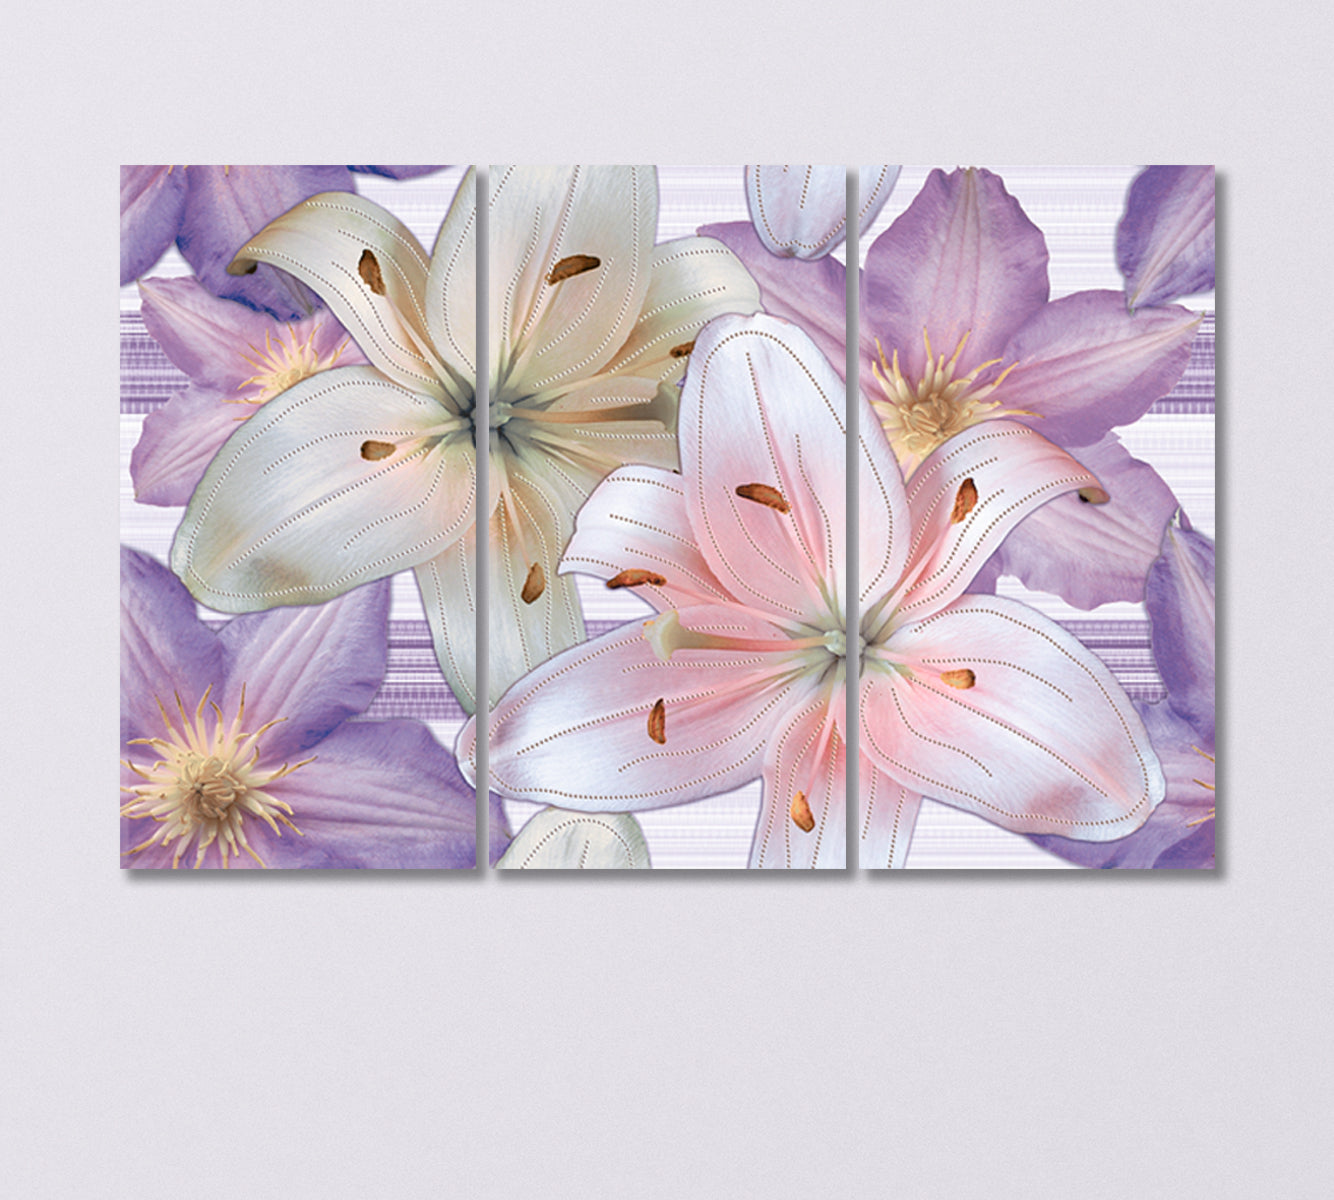 Abstract Lily Flowers Canvas Print-Canvas Print-CetArt-3 Panels-36x24 inches-CetArt